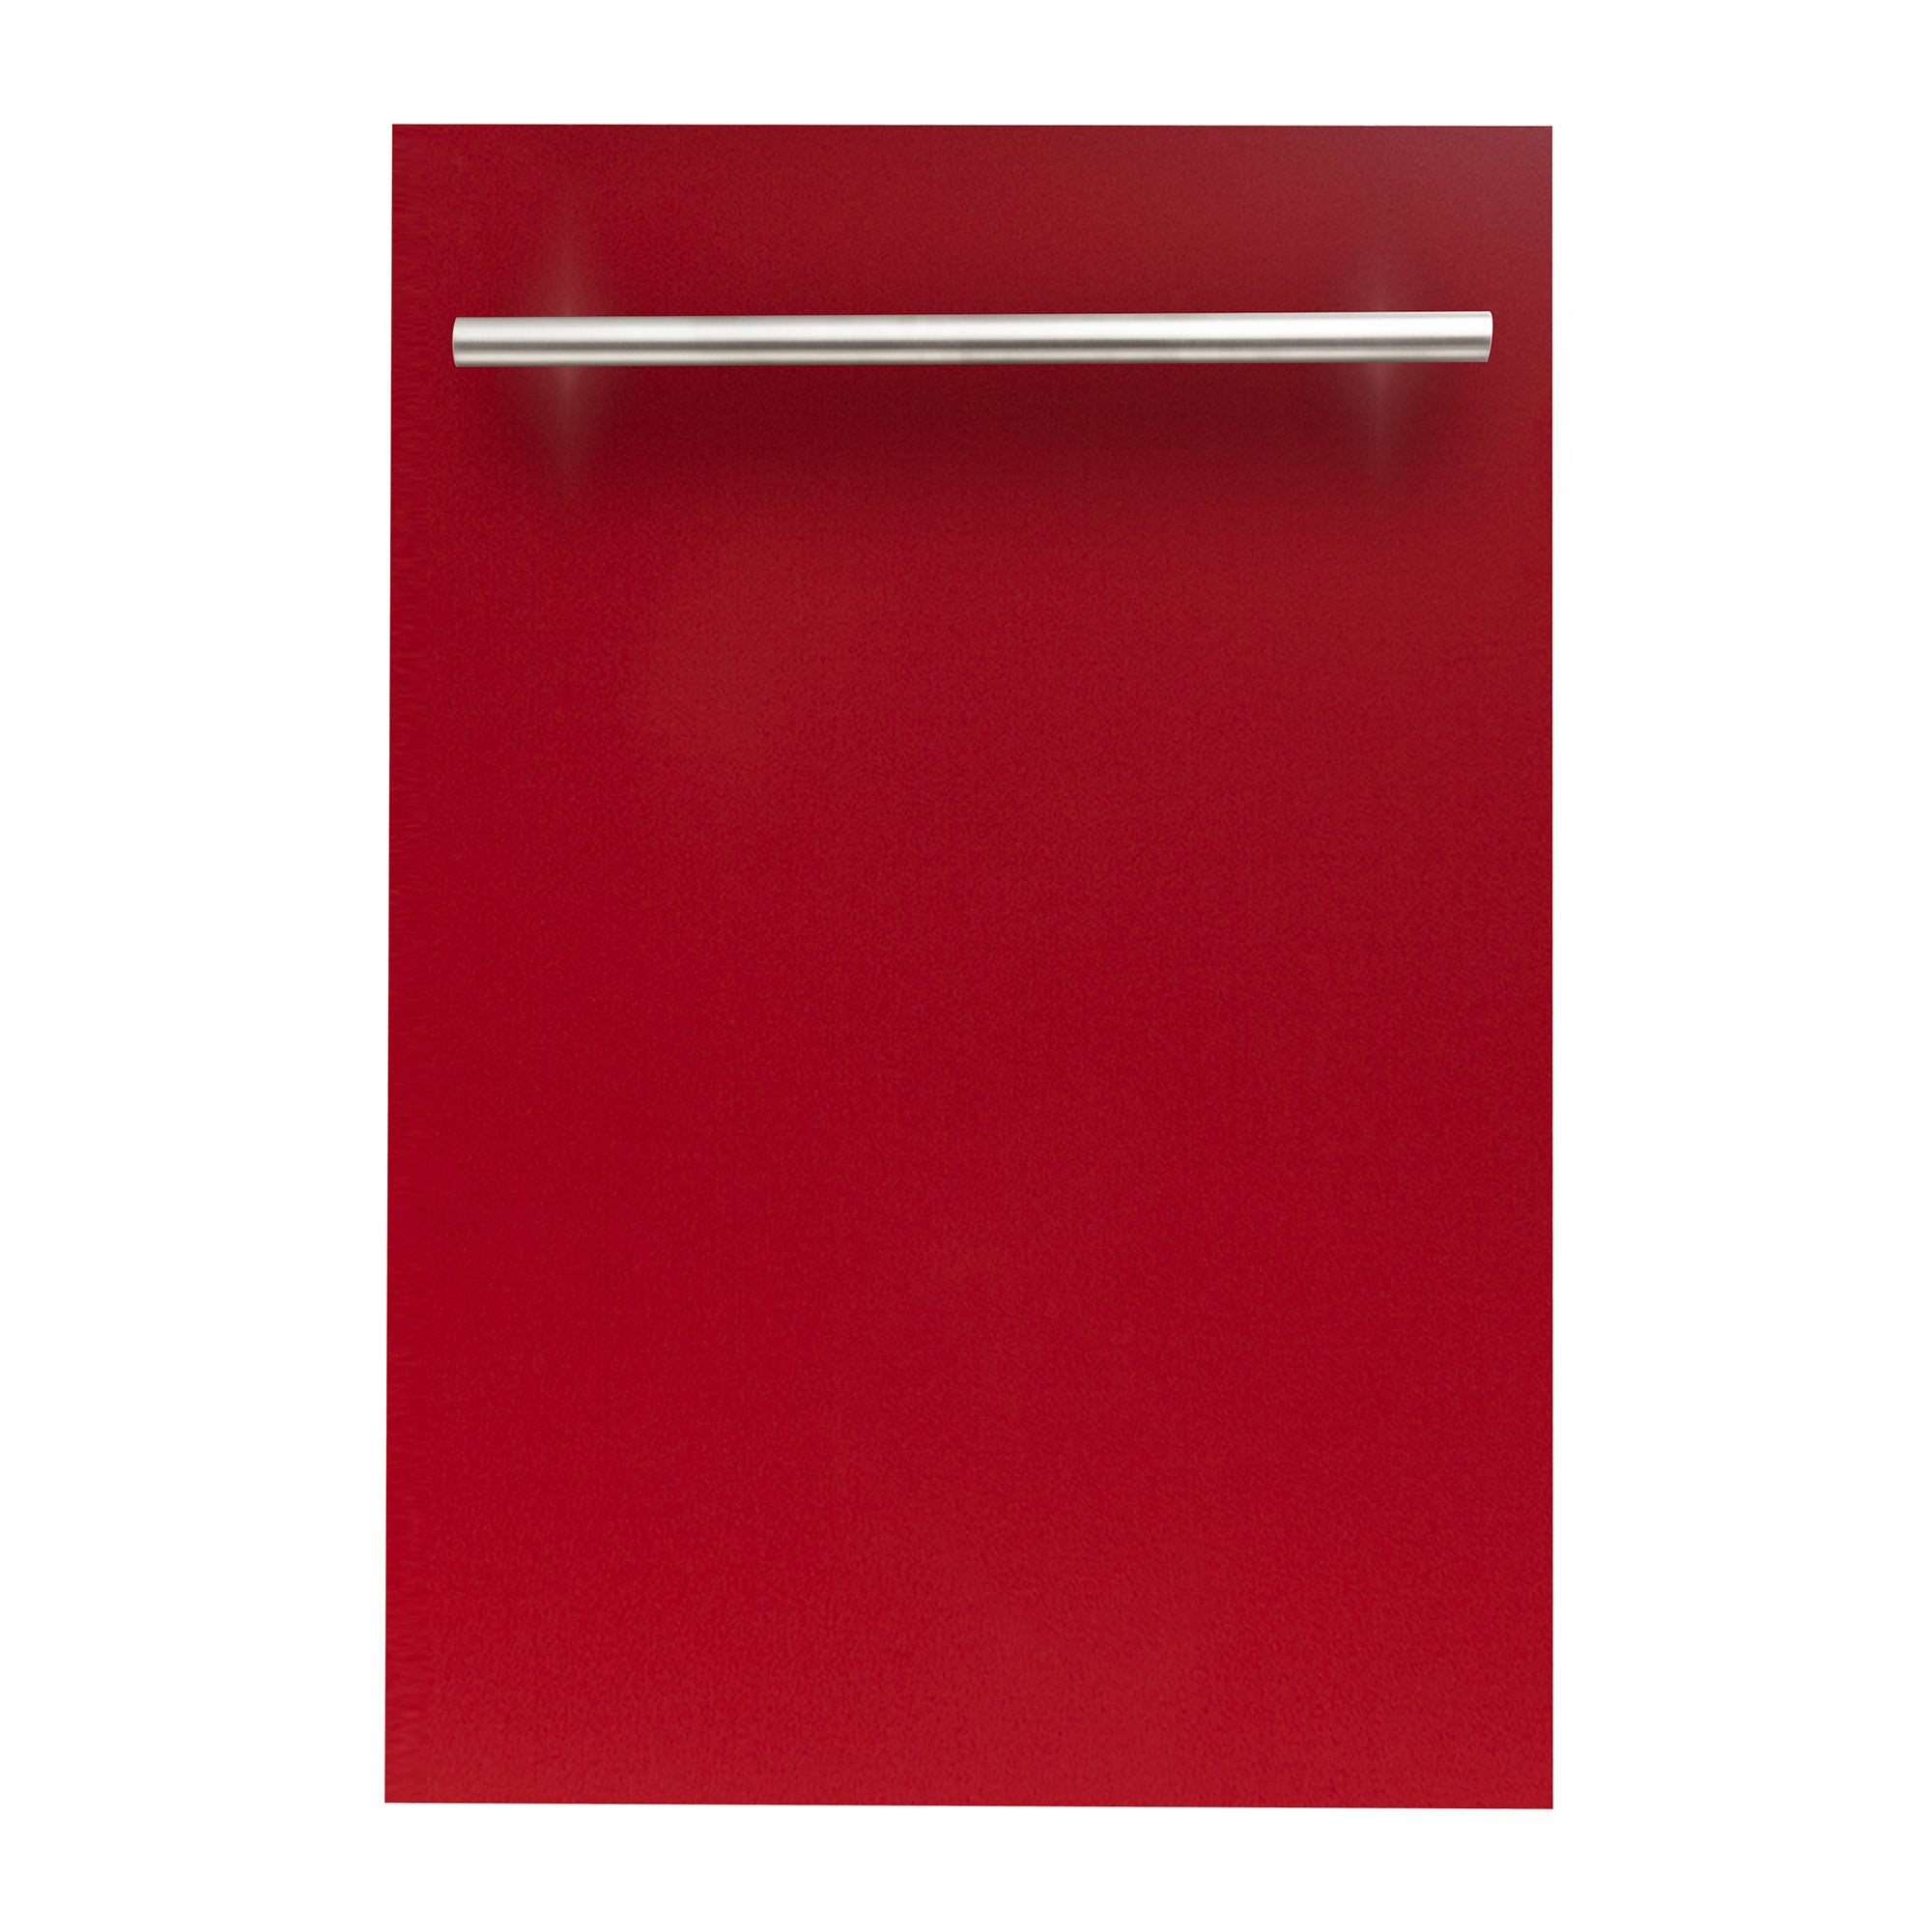 ZLINE 18" Dishwasher Panel in Red Gloss with Modern Handle (DP-RG-H-18)